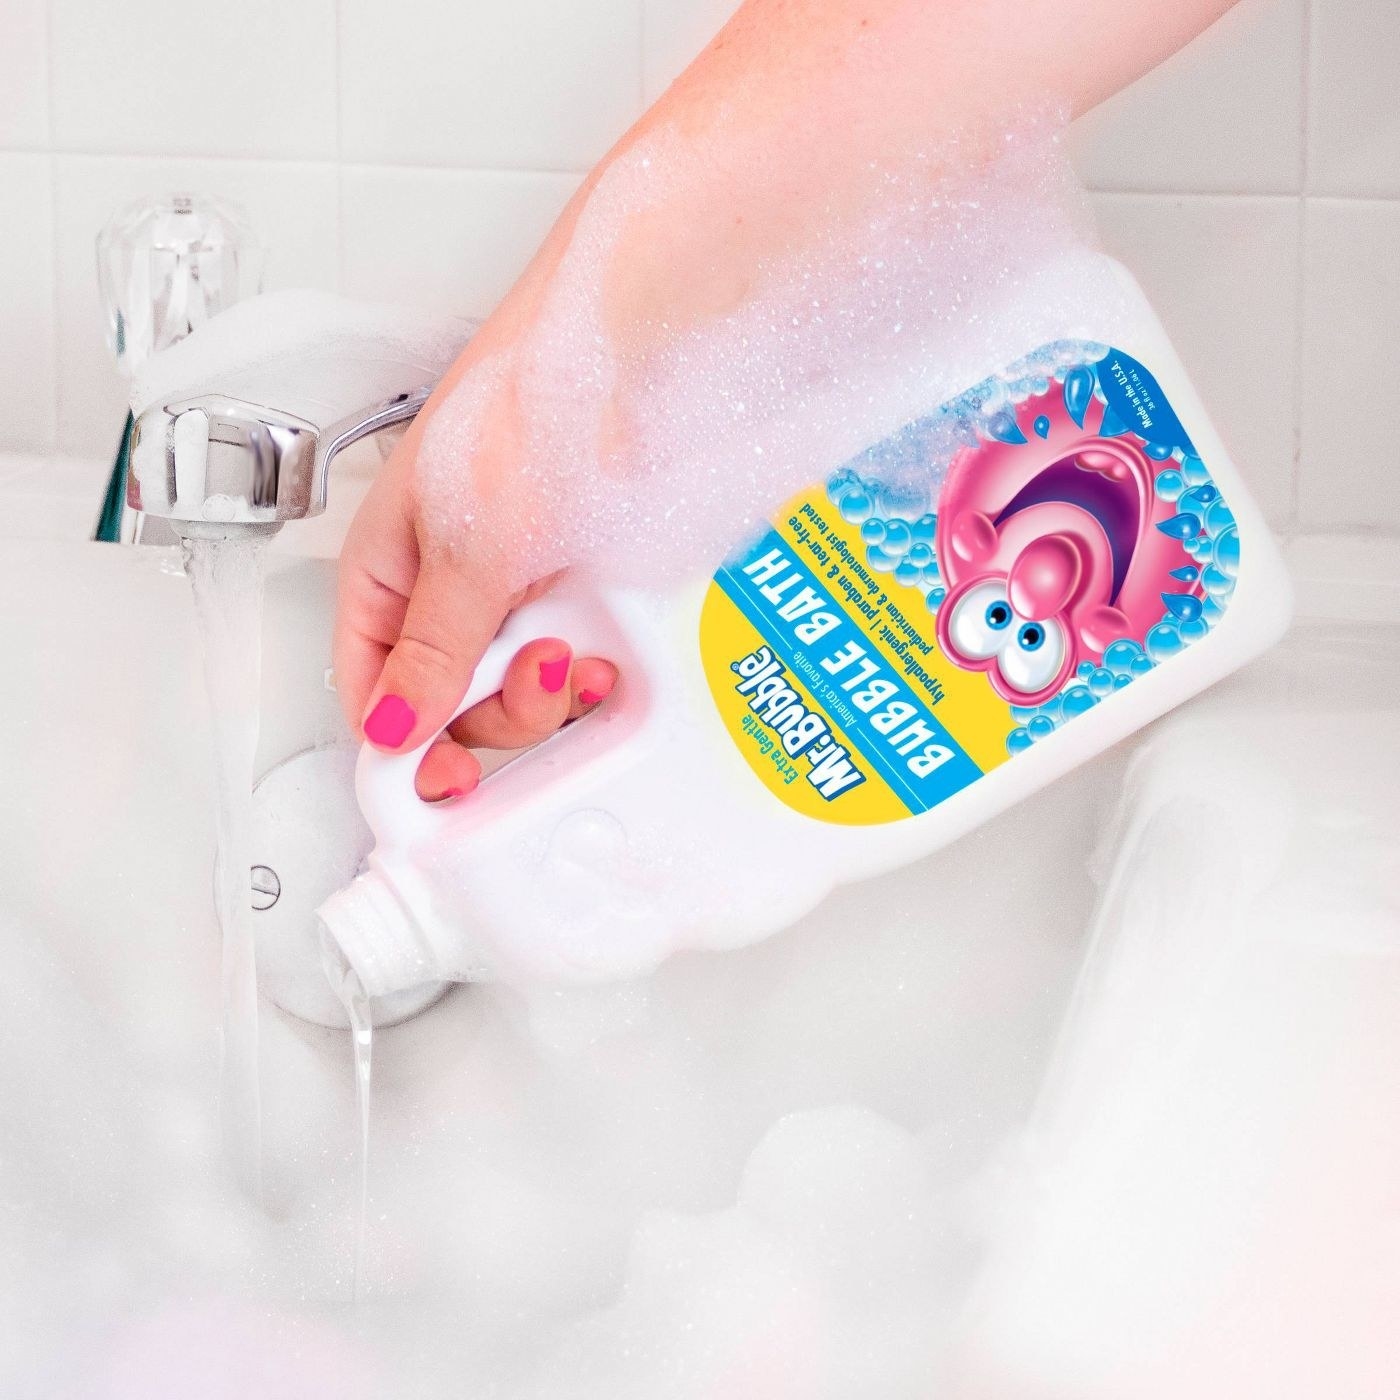 Hand pouring a bottle of Mr. Bubbles into a tub